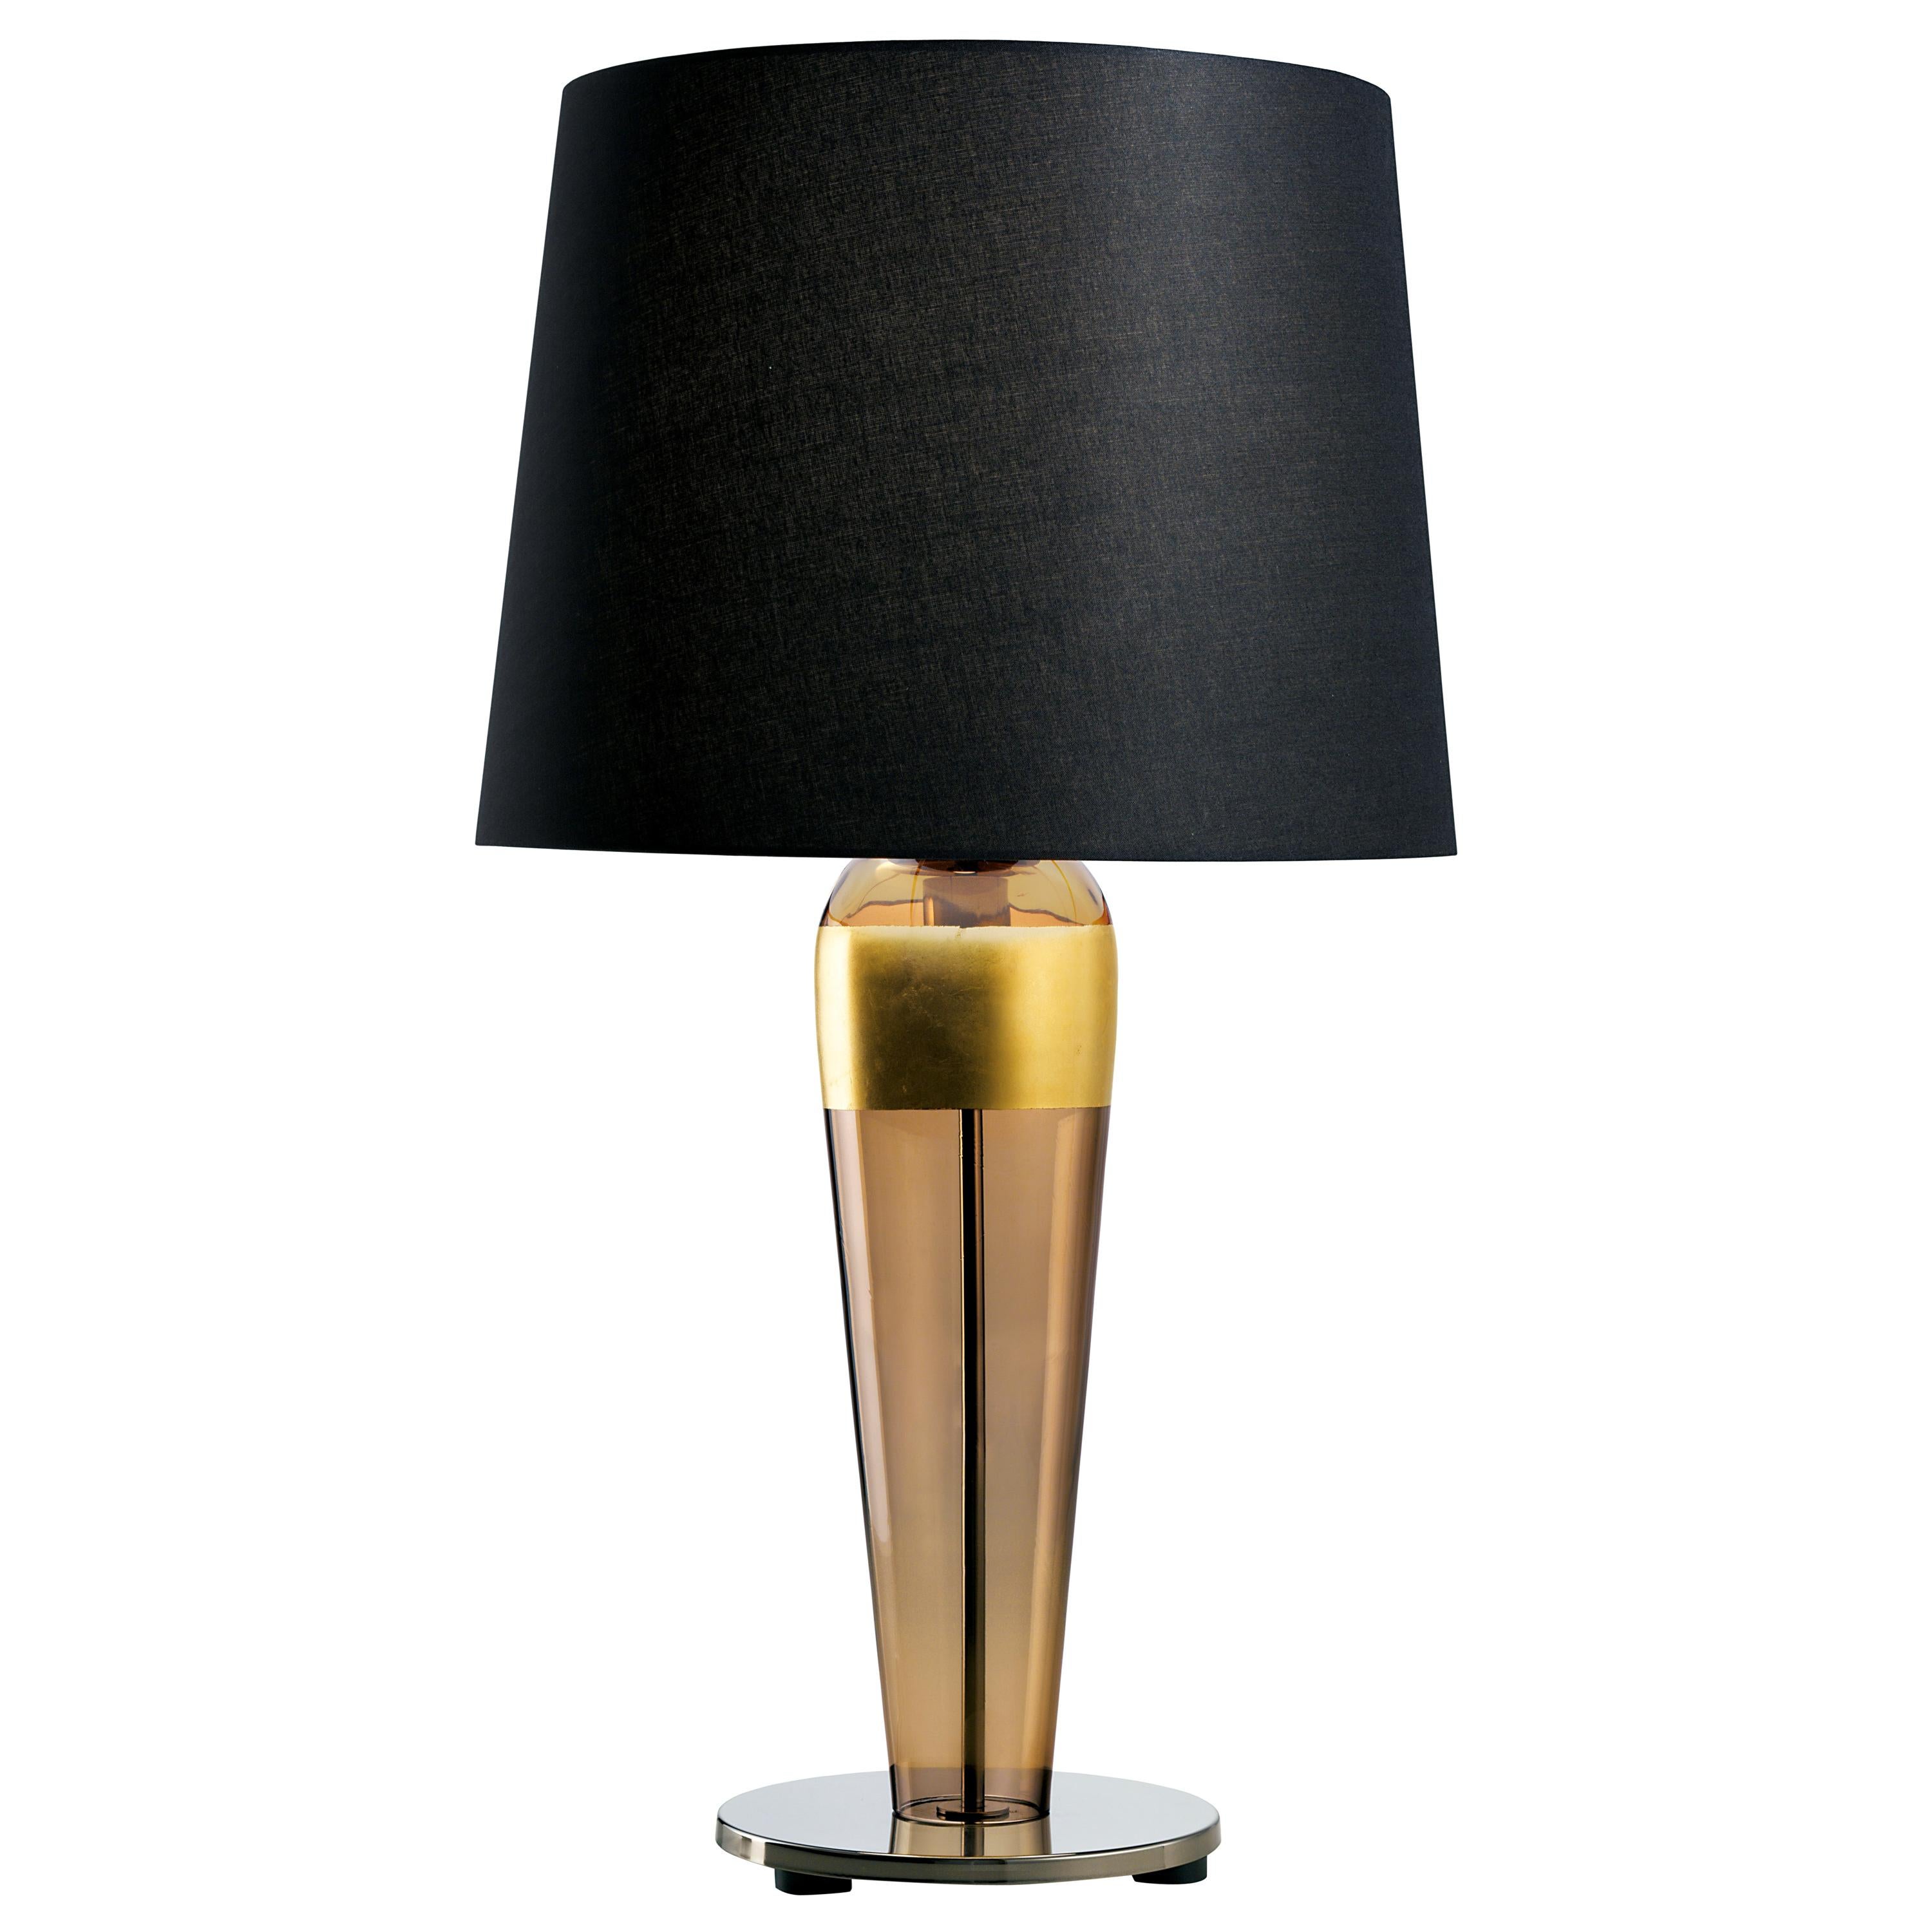 Brown (Brown_BW) Sara 5574 Table Lamp in Glass with Black Shade, by Barovier&Toso